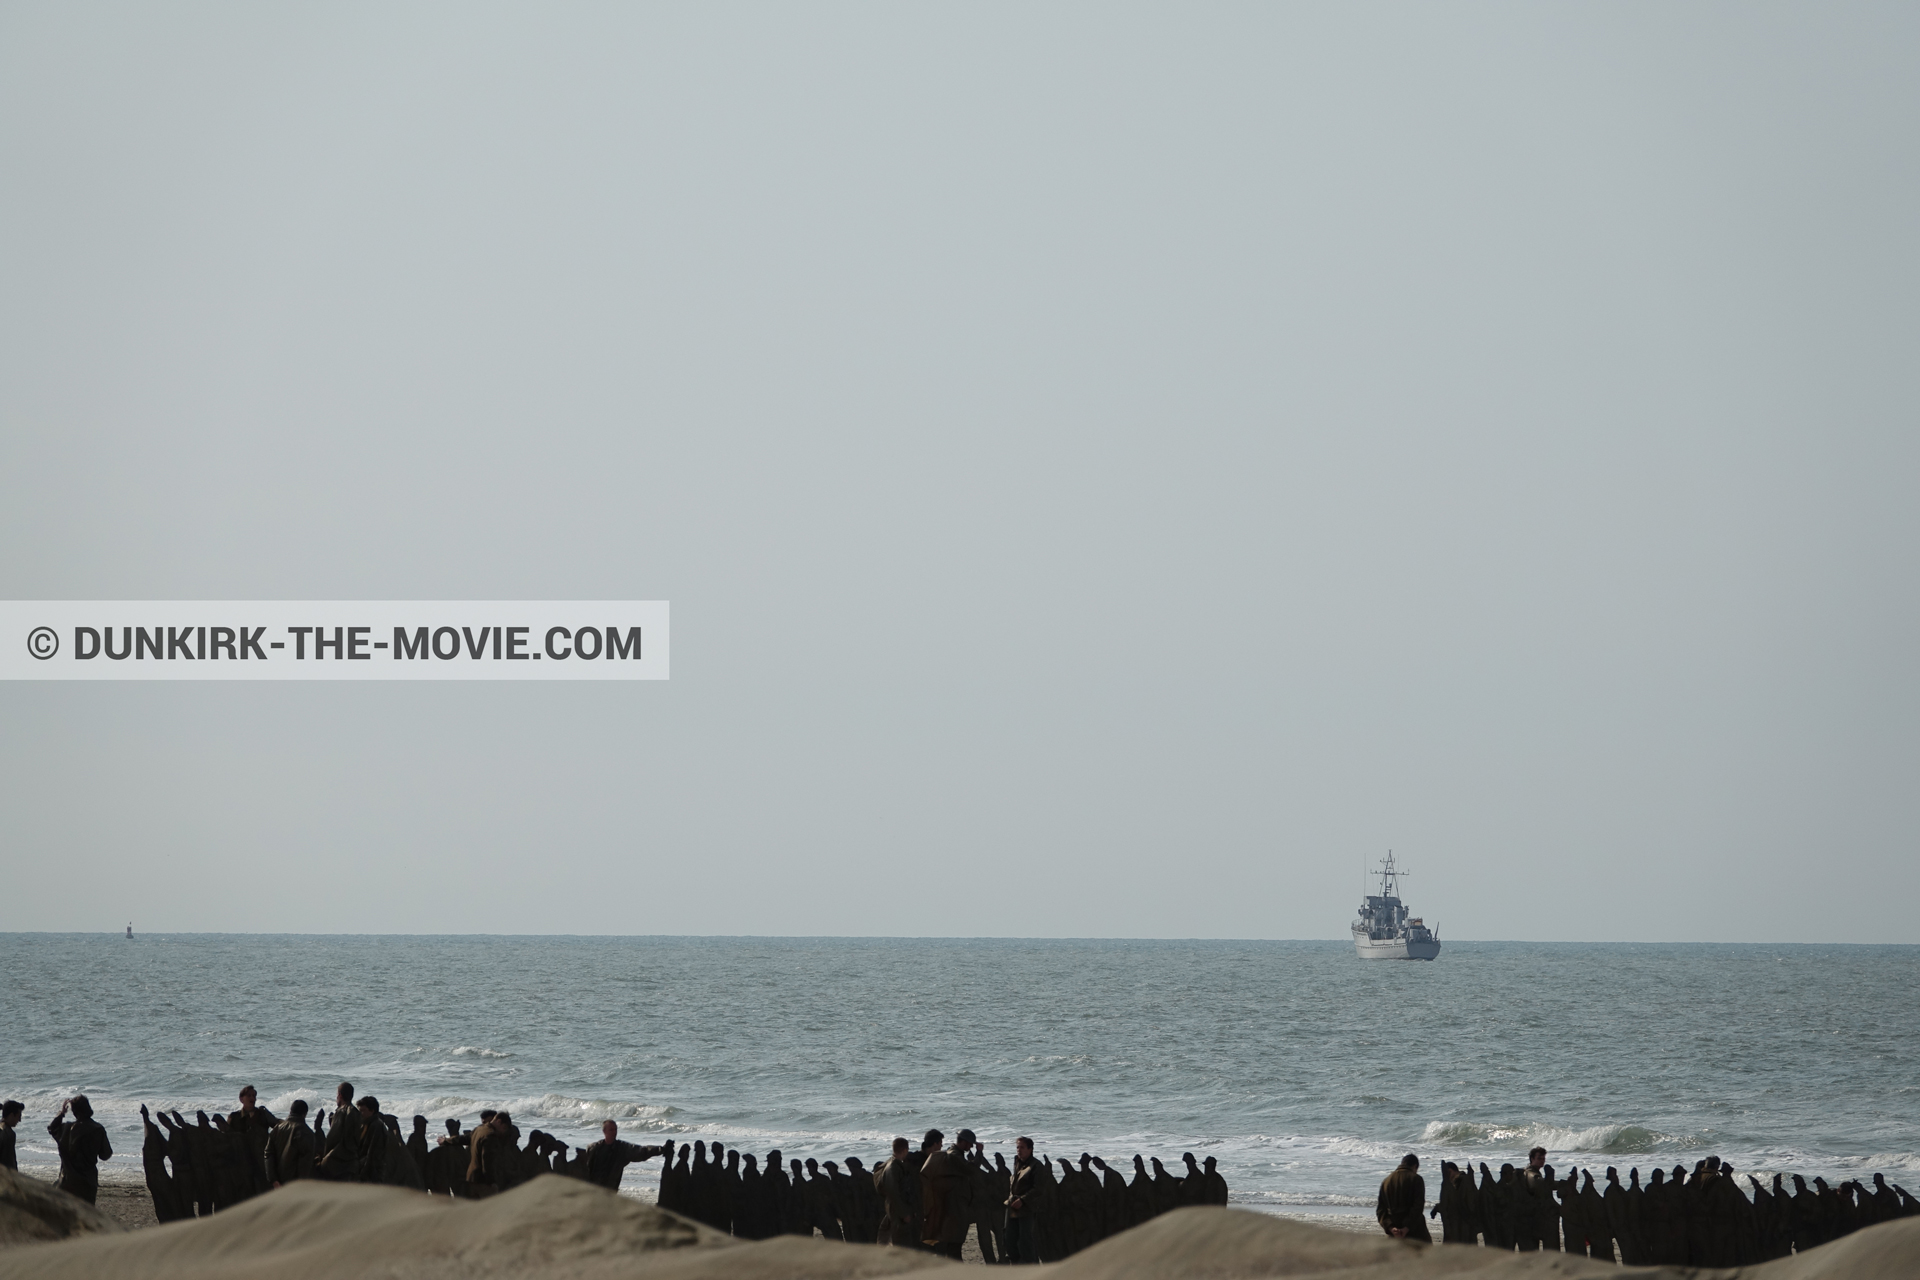 Picture with boat, decor, supernumeraries, rough sea, beach,  from behind the scene of the Dunkirk movie by Nolan